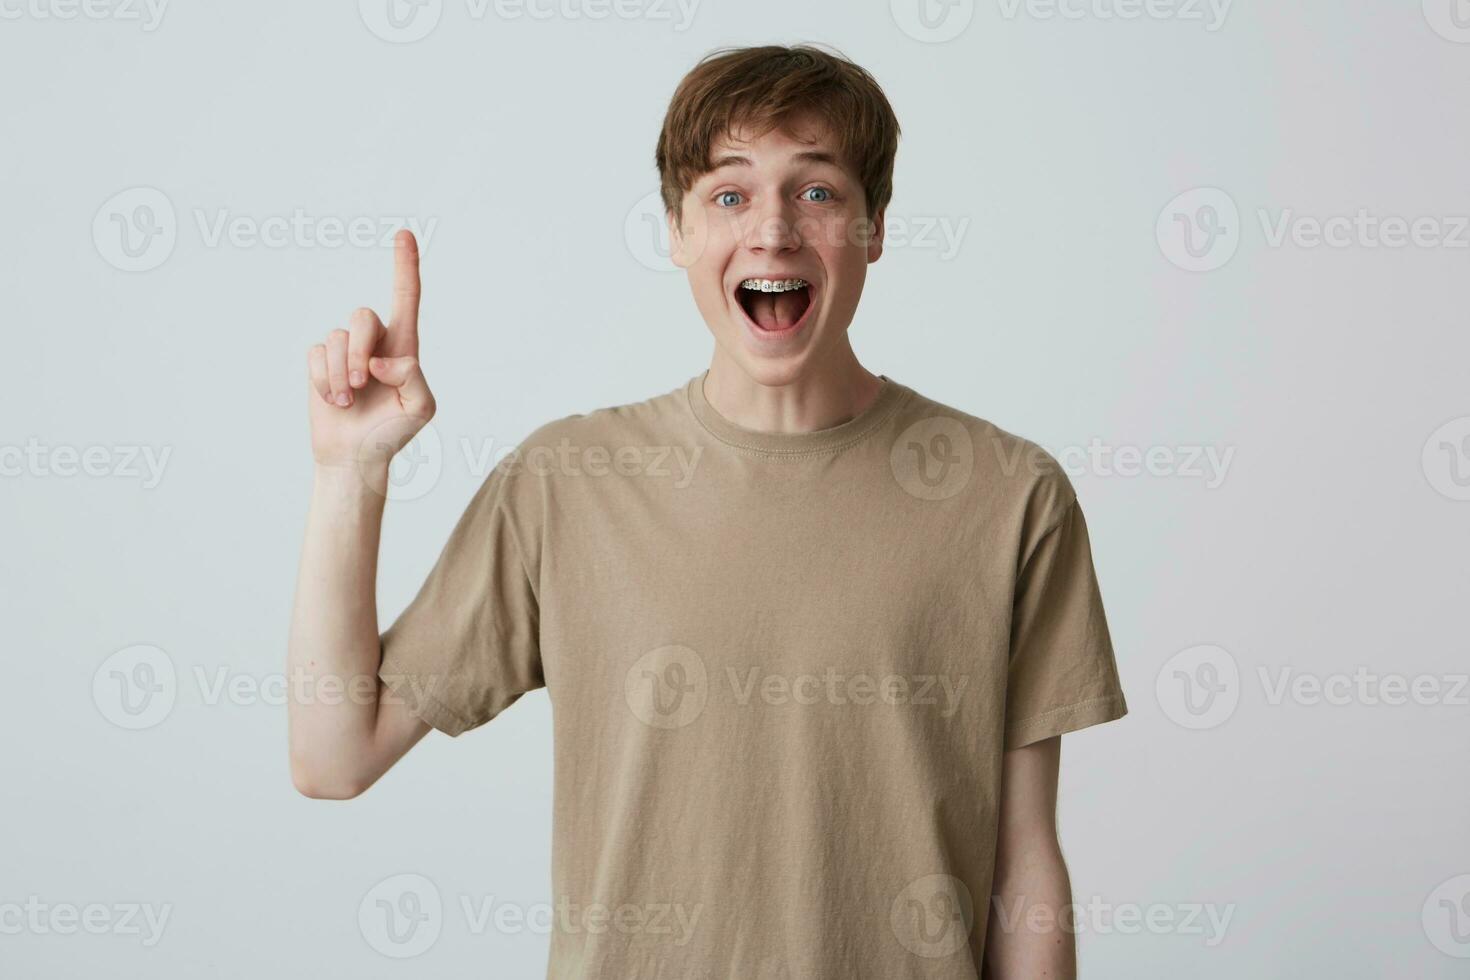 Happy excited blond young man with short haircut and braces on teeth wears beige t shirt and pointing up isolated over white background Have a new idea photo